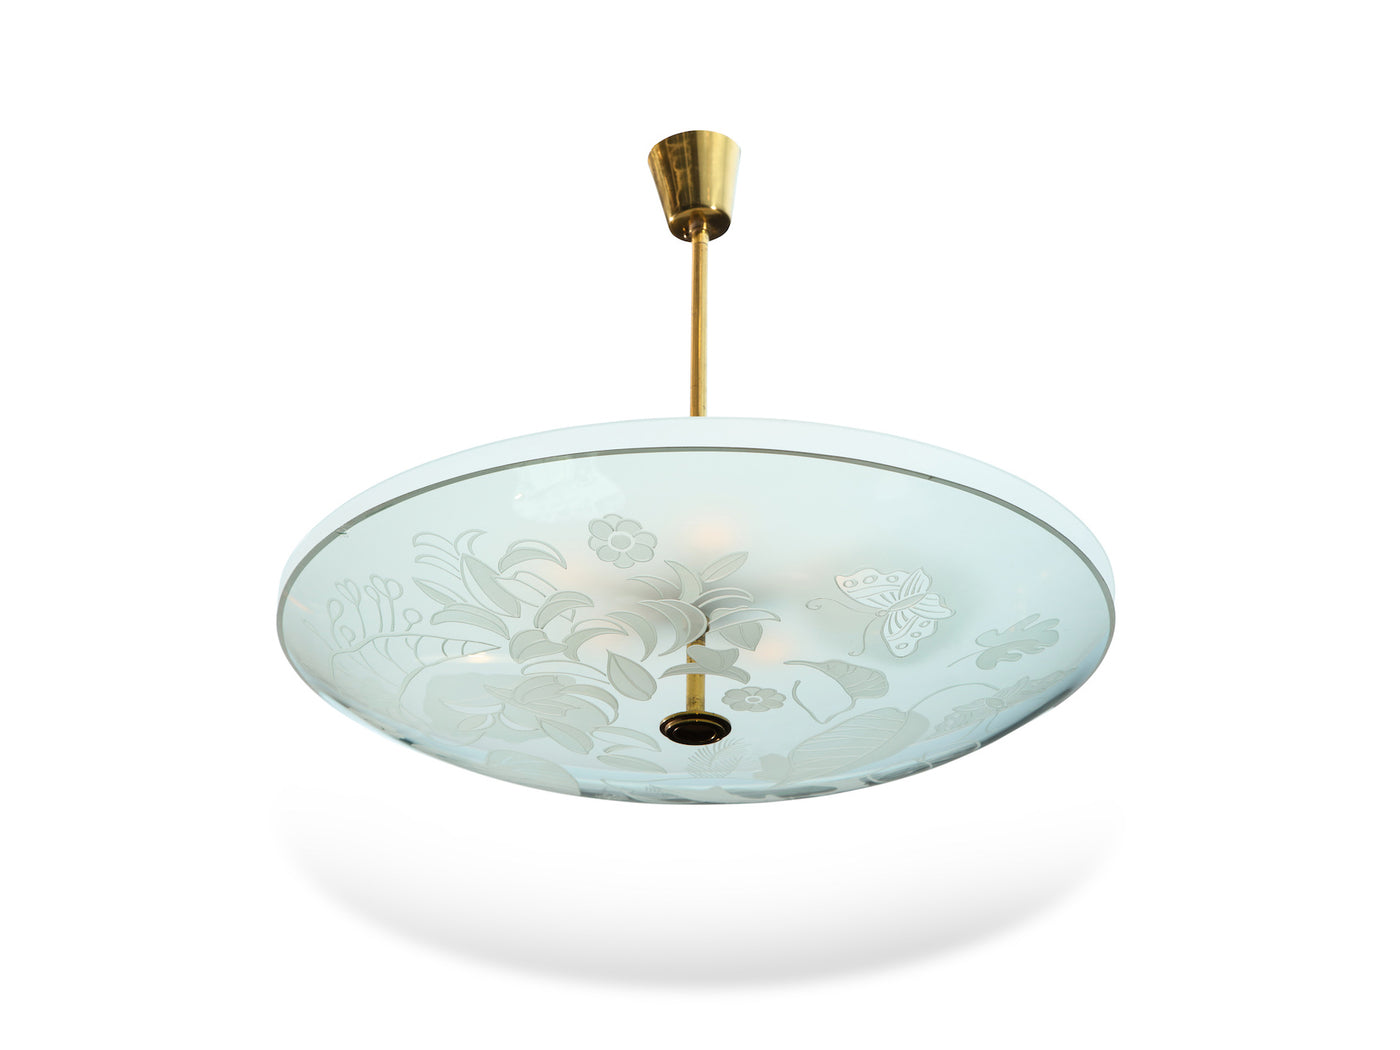 Etched Glass Ceiling Fixture By Pietro Chiesa for Fontana Arte